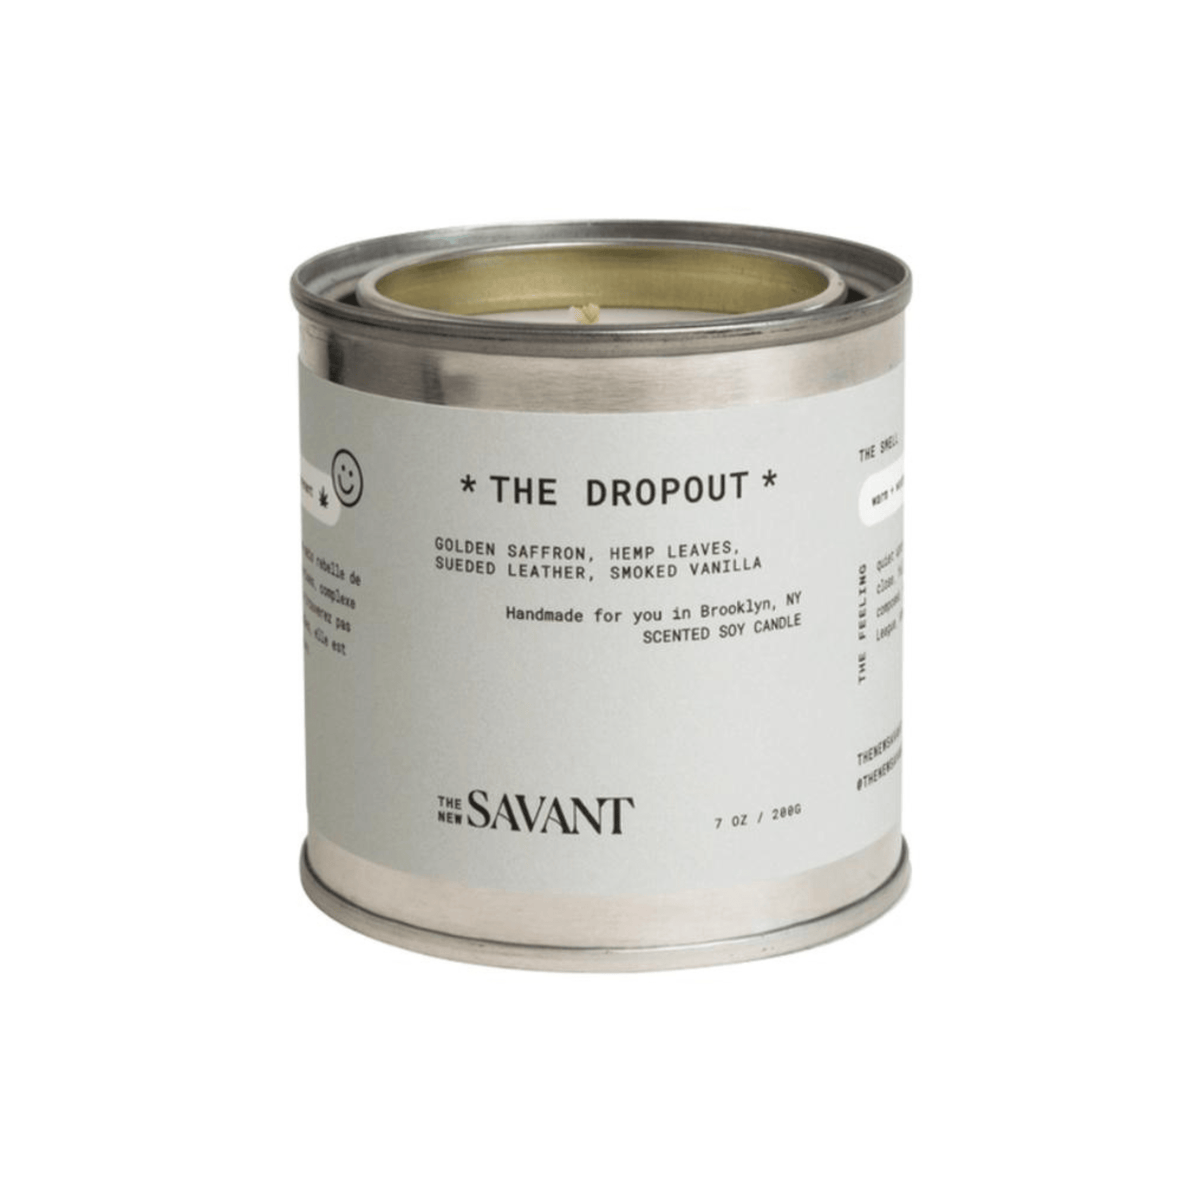 Primary Image of The Dropout Candle